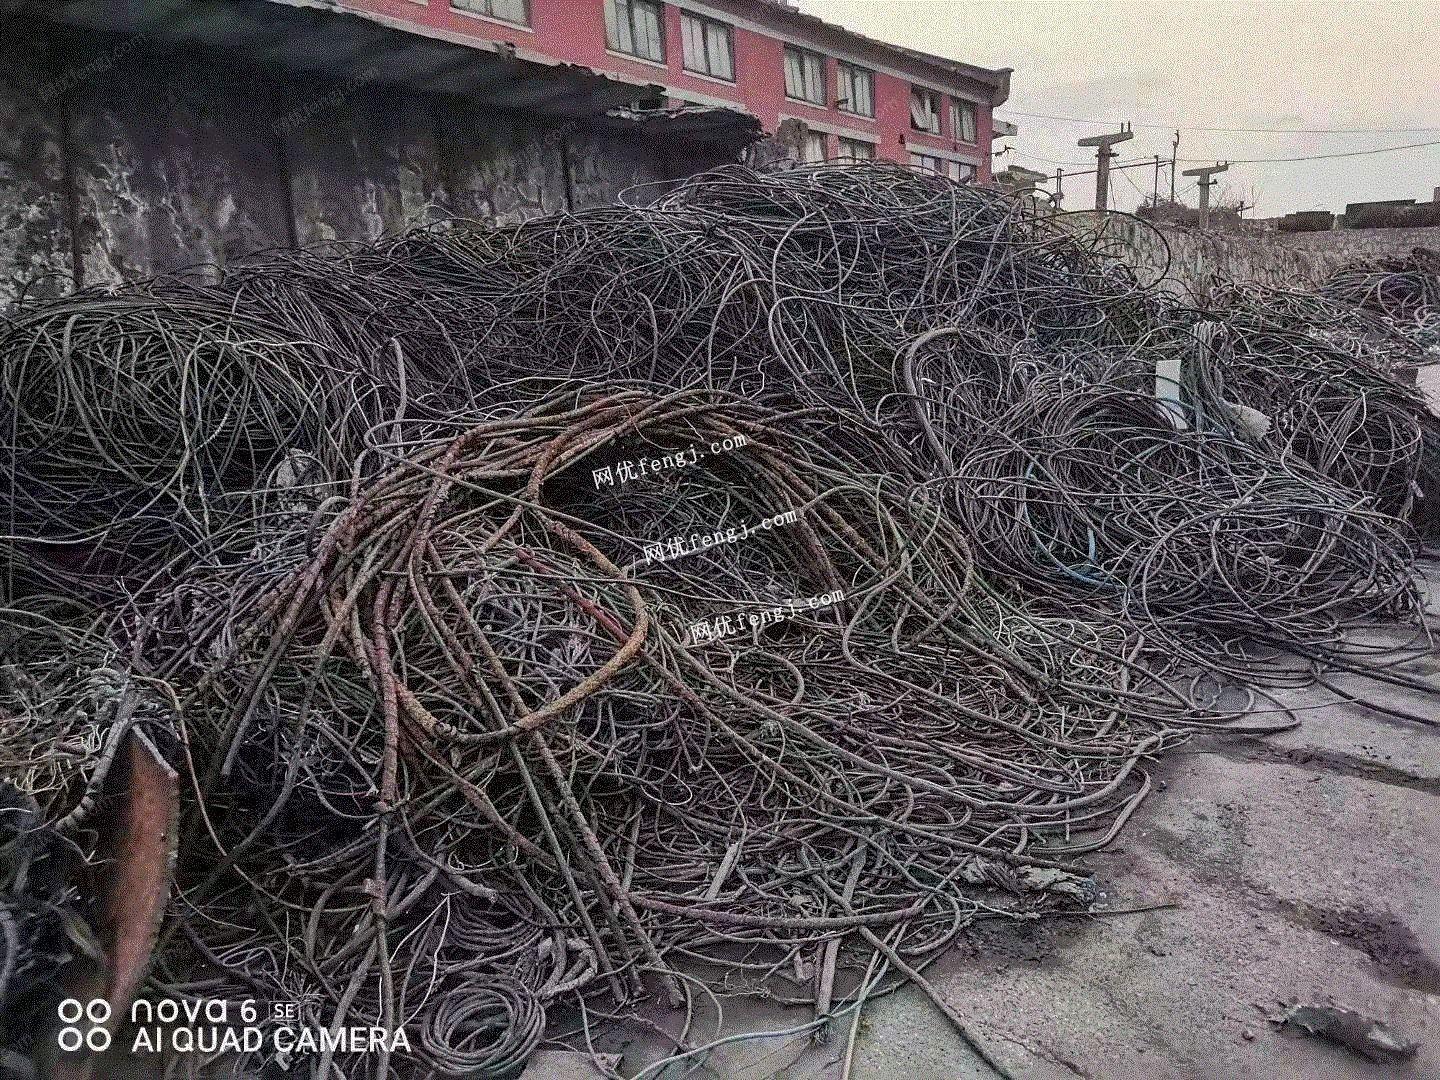 Long term massive recovery of waste copper, wires and cables